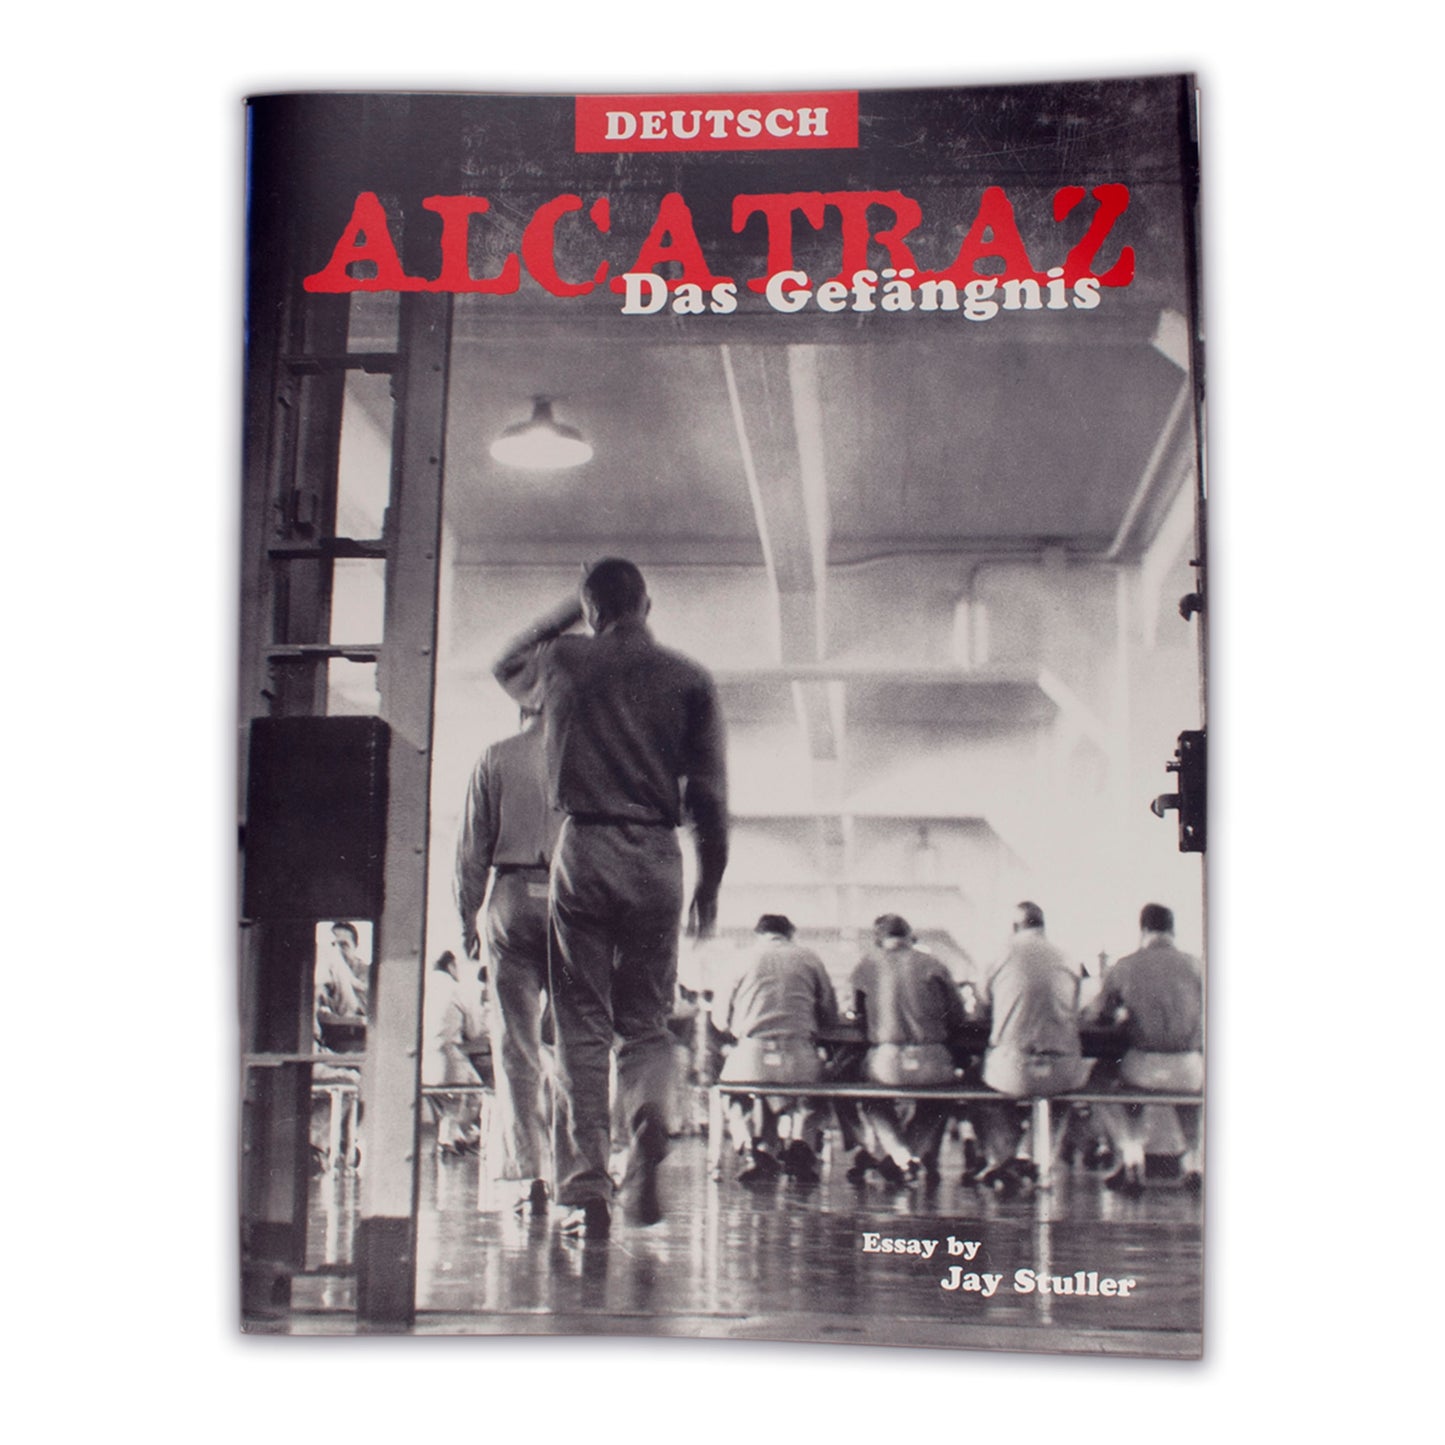 A copy of a German translation of Alcatraz the Prison book by Jay Stuller, a brief history of America's most notorious prison.